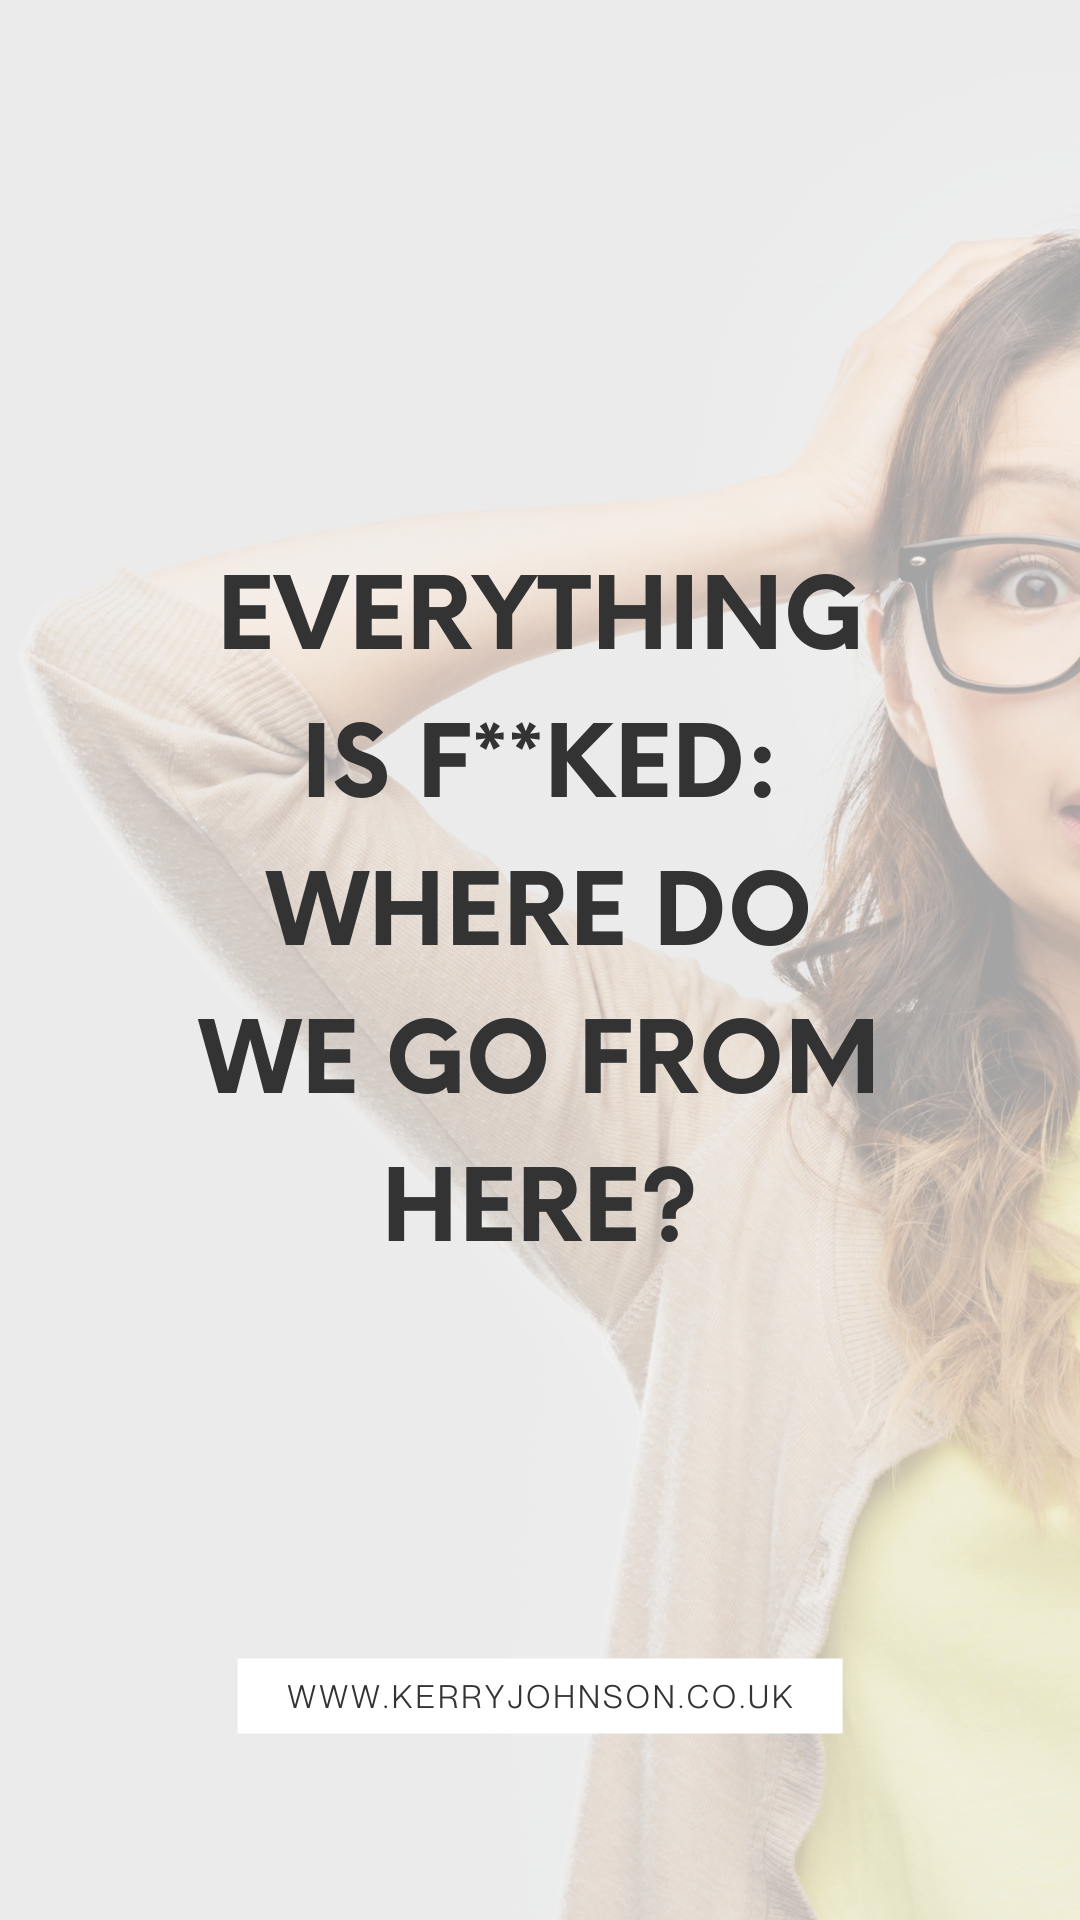 Everything is F**ked: Where Do We Go from Here?